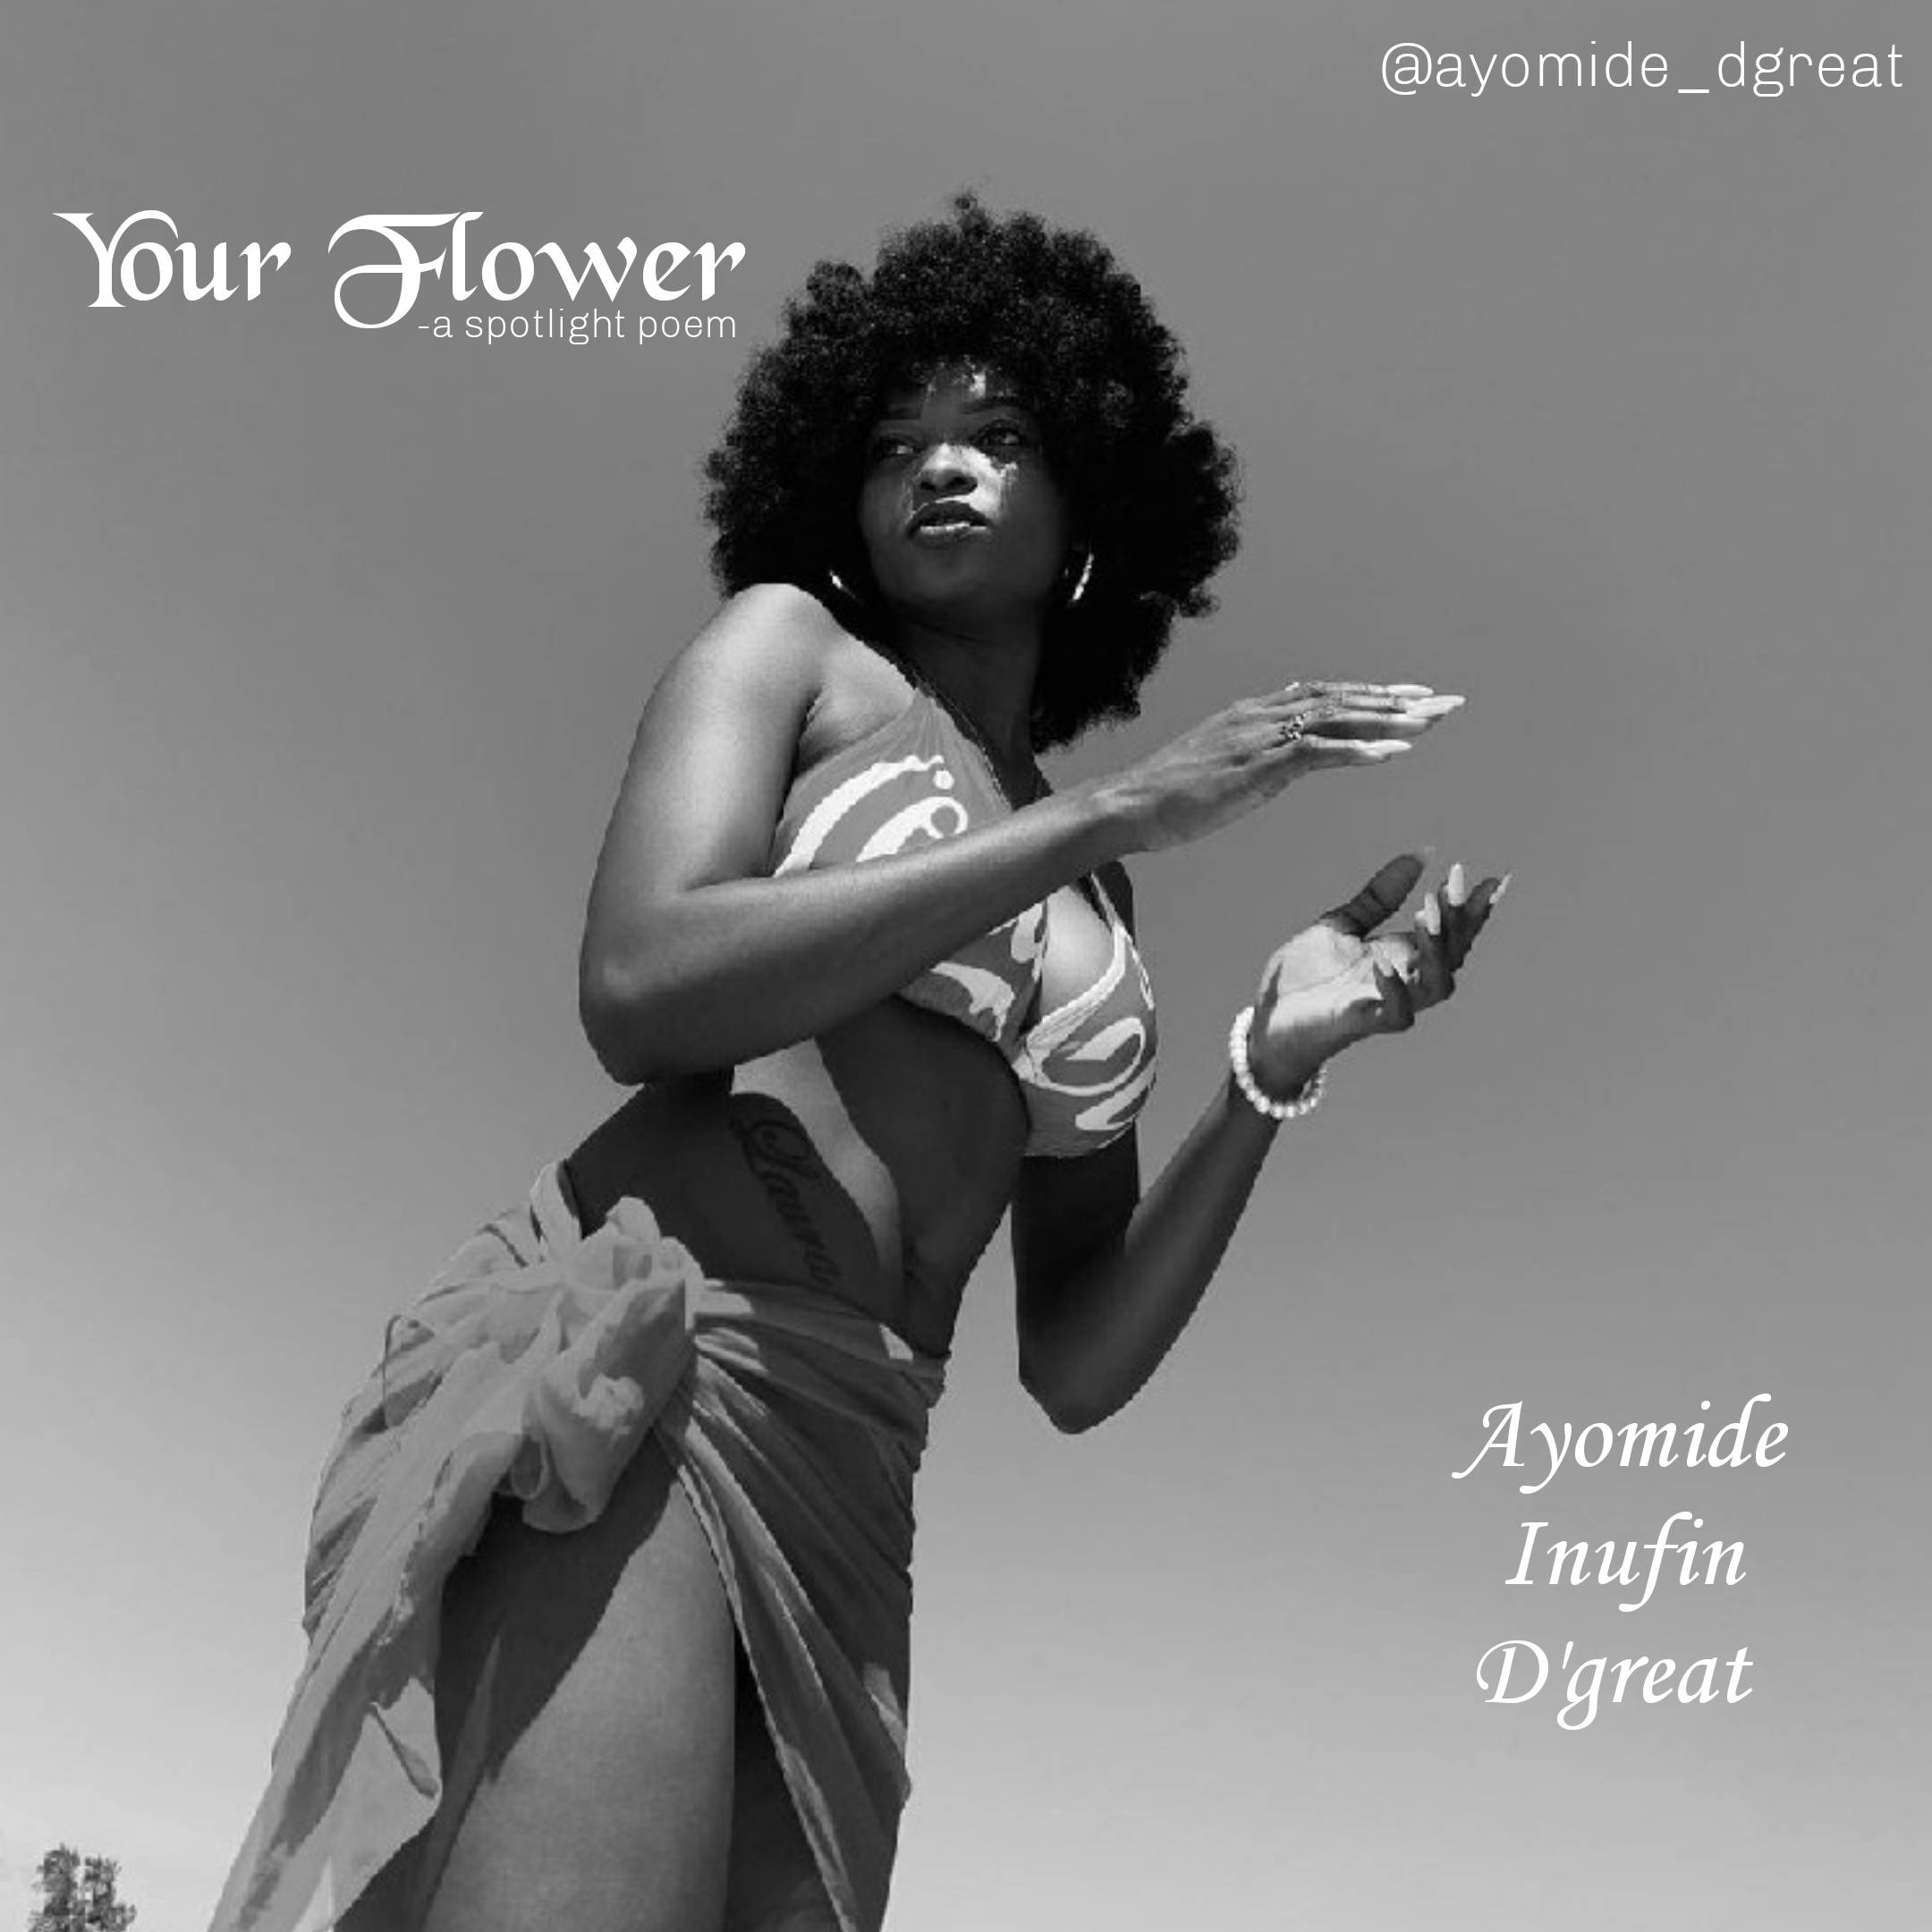 Ayomide Inufin D’great - Your Flower Artwork